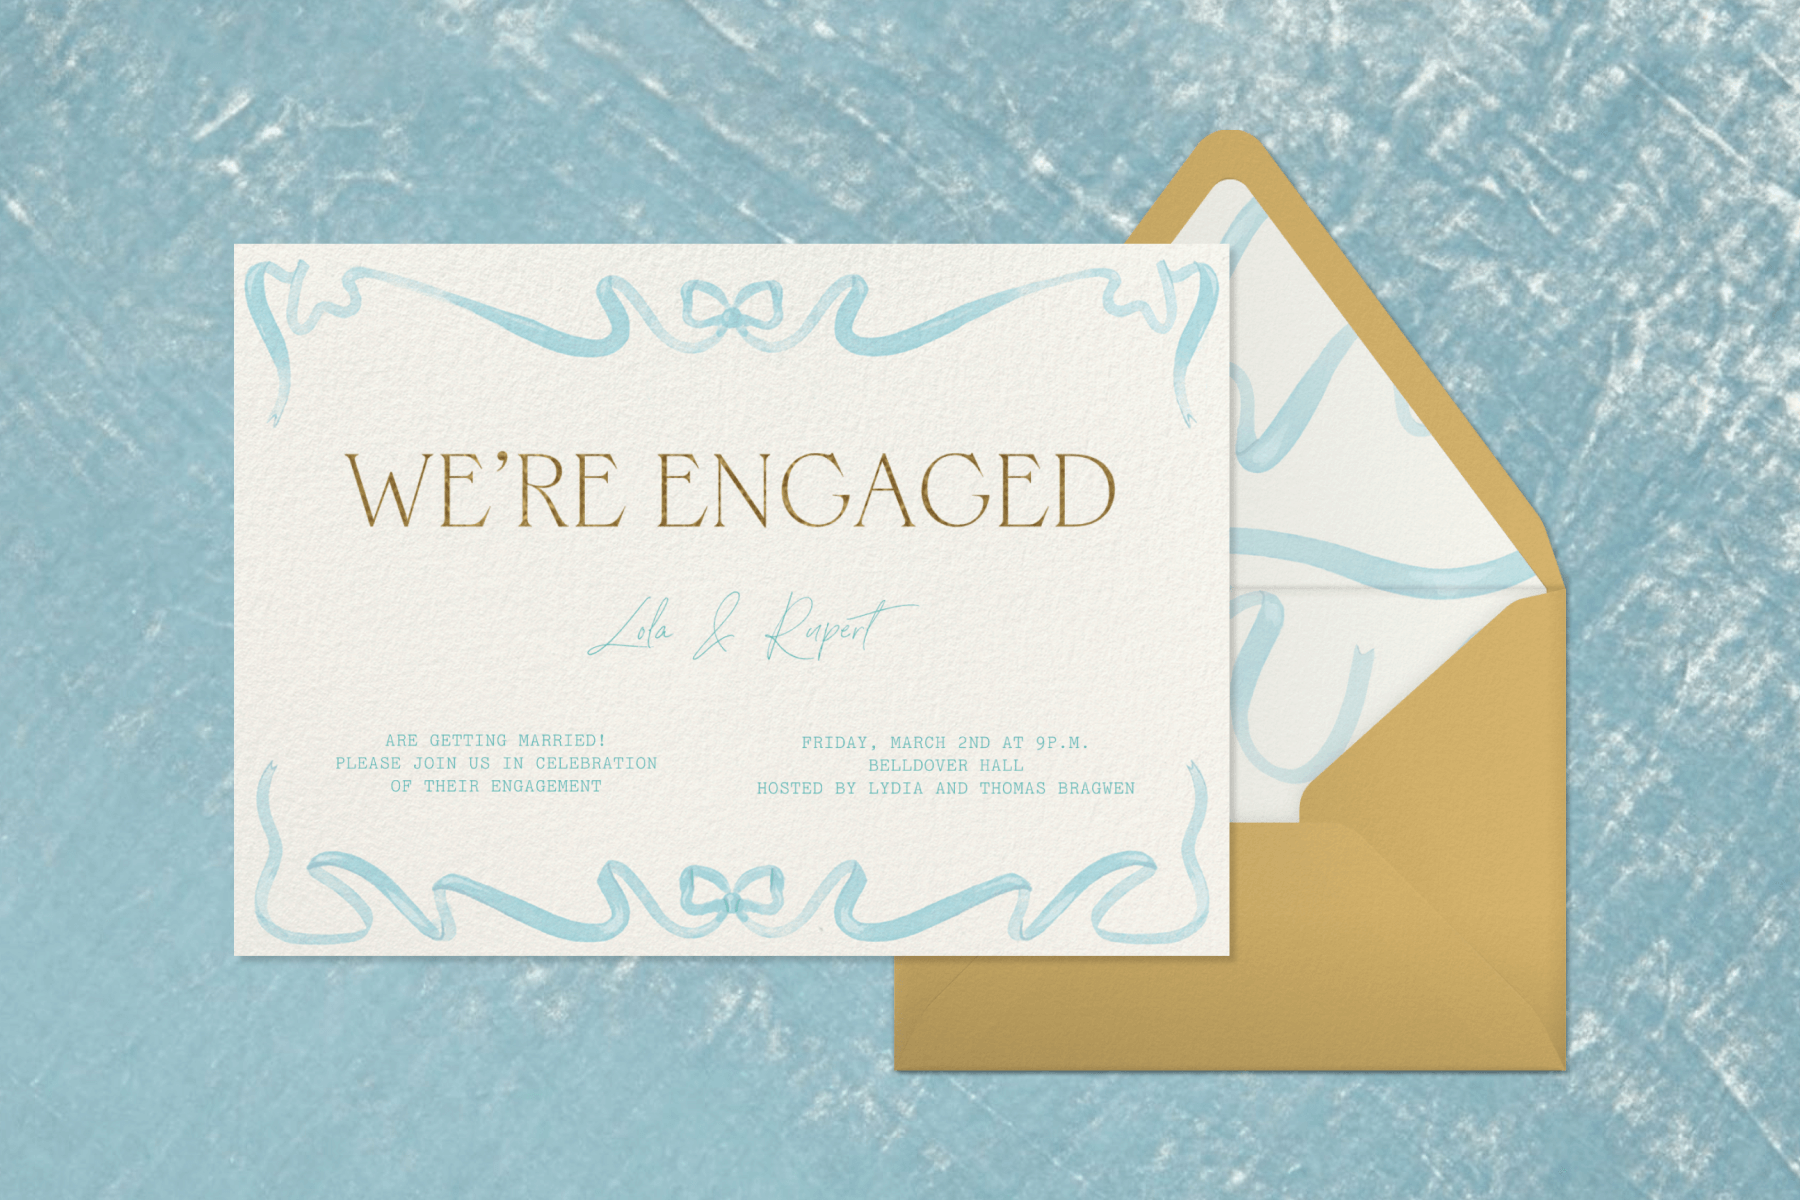 A horizontal engagement party invitation with a delicate blue bow illustration and matching envelope.